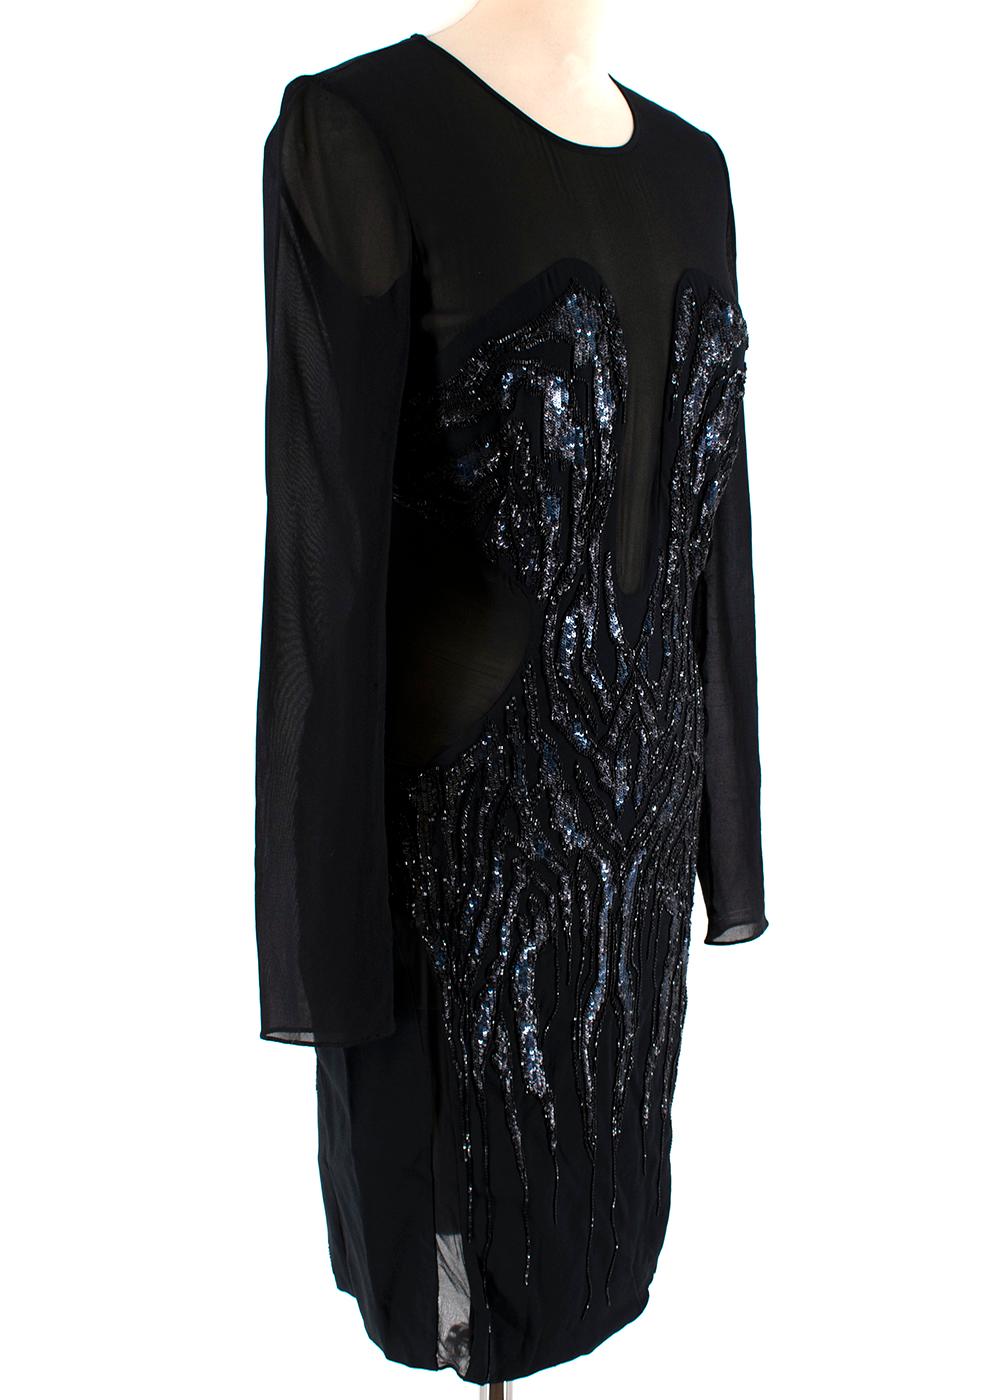 Roberto Cavalli Black Sequin Dress

- Embellished with a mixture of shaped sequins in two tone black and navy for a metallic look
- Light-medium weight material
- Silk body is sheer on the sleeves and on the sides of the dress
- Back zip fastening